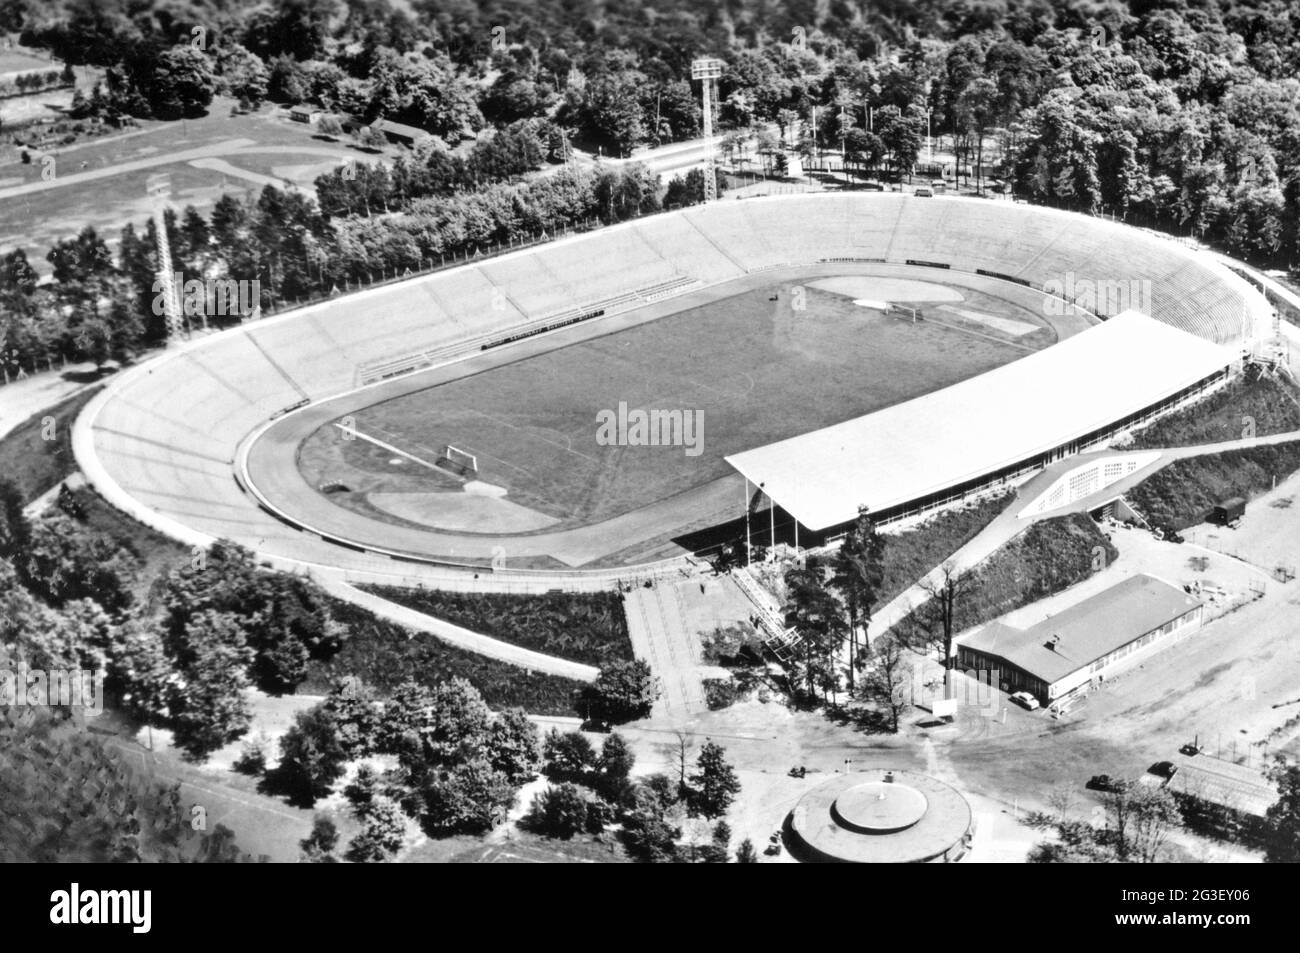 geography / travel historic, Germany, cities and communities, Karlsruhe, sports, Wildparkstadion, ADDITIONAL-RIGHTS-CLEARANCE-INFO-NOT-AVAILABLE Stock Photo